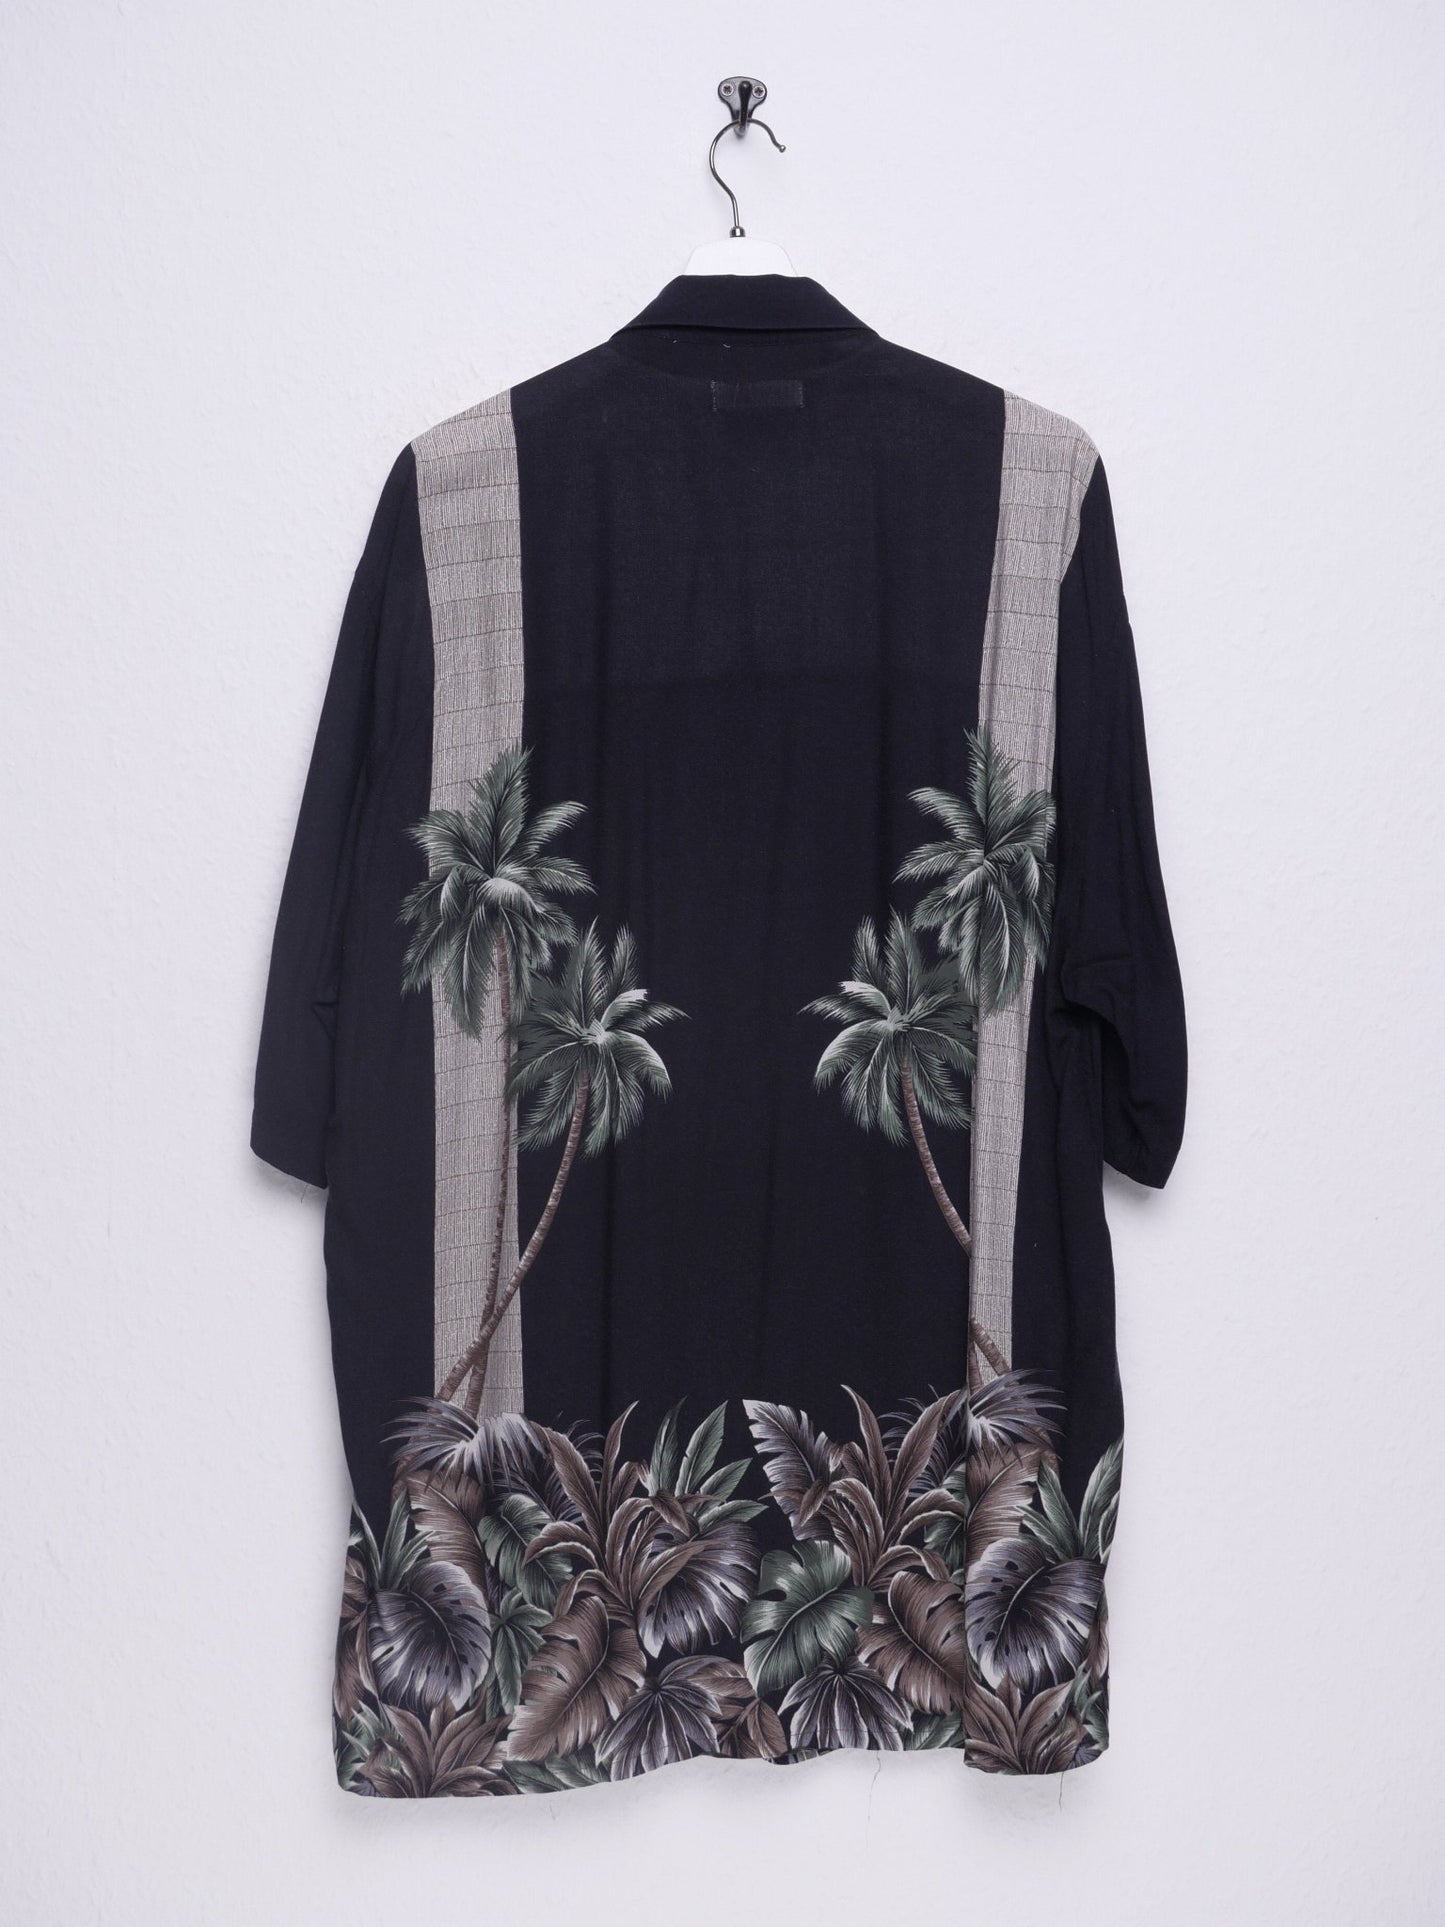 'Palm Trees' printed Pattern multicolored S/S Hemd - Peeces